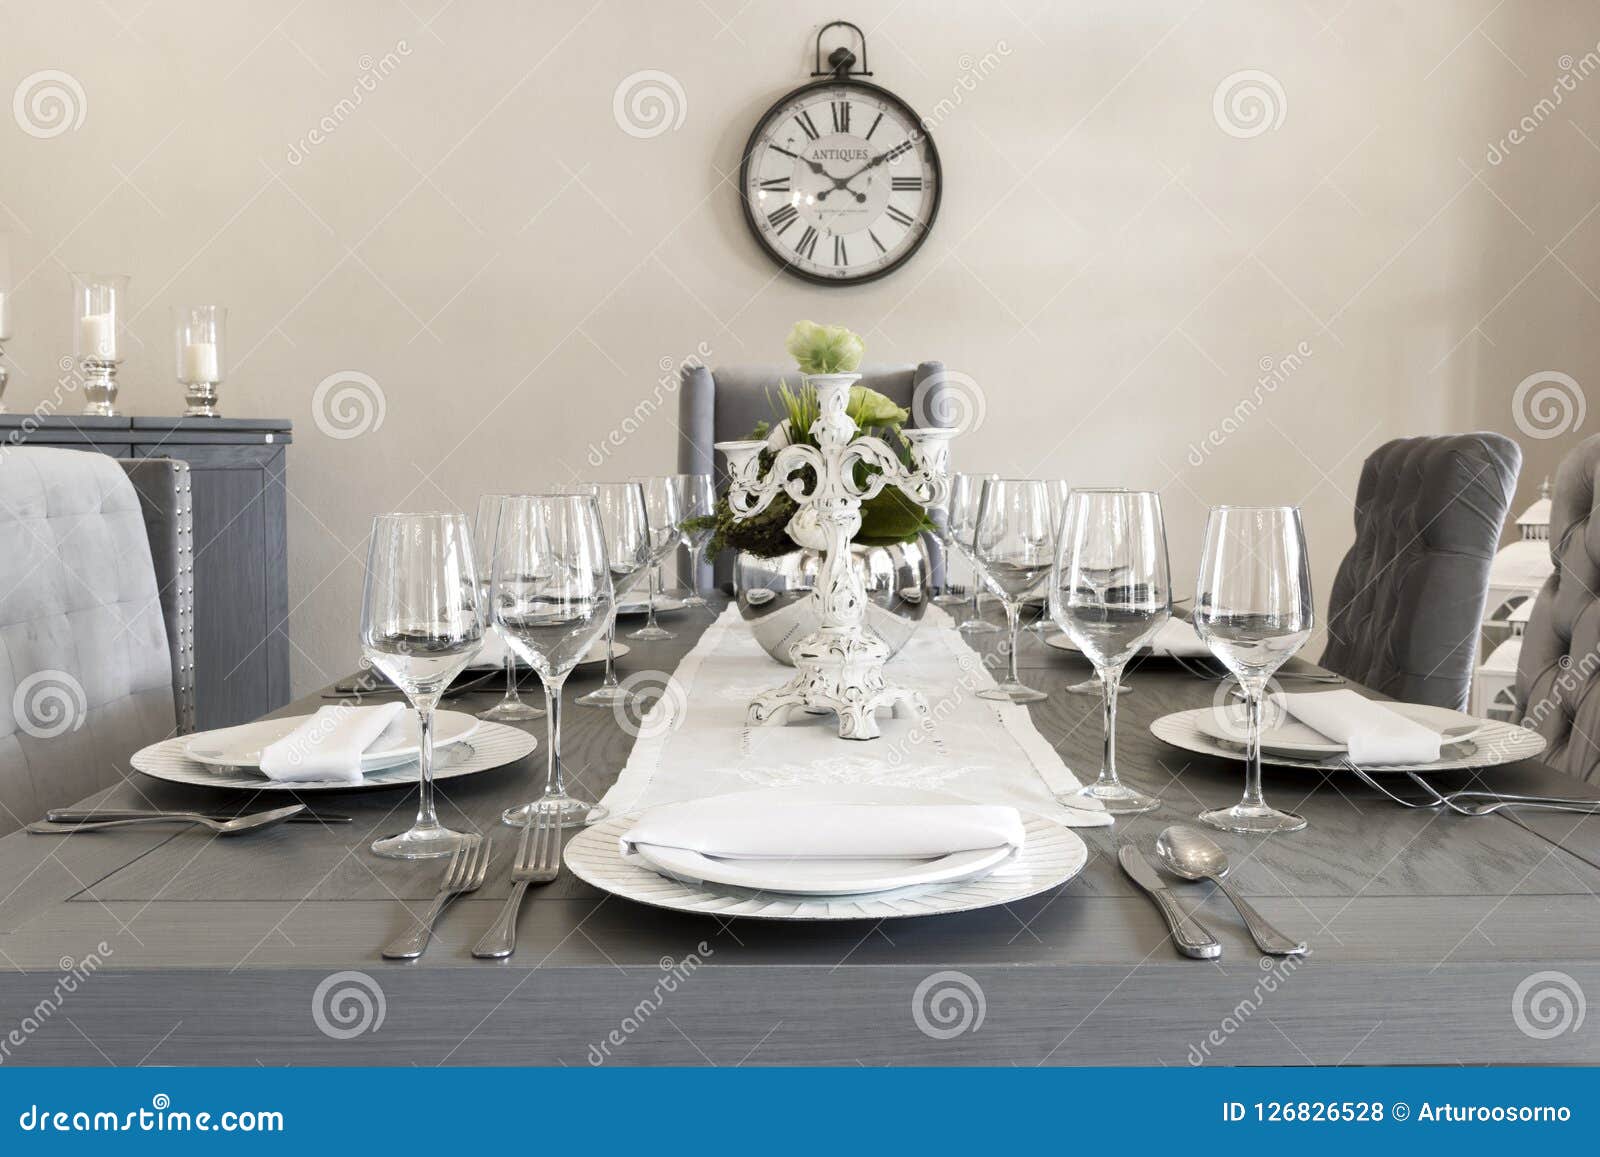 a luxurious dining room of a house with glasses and plates